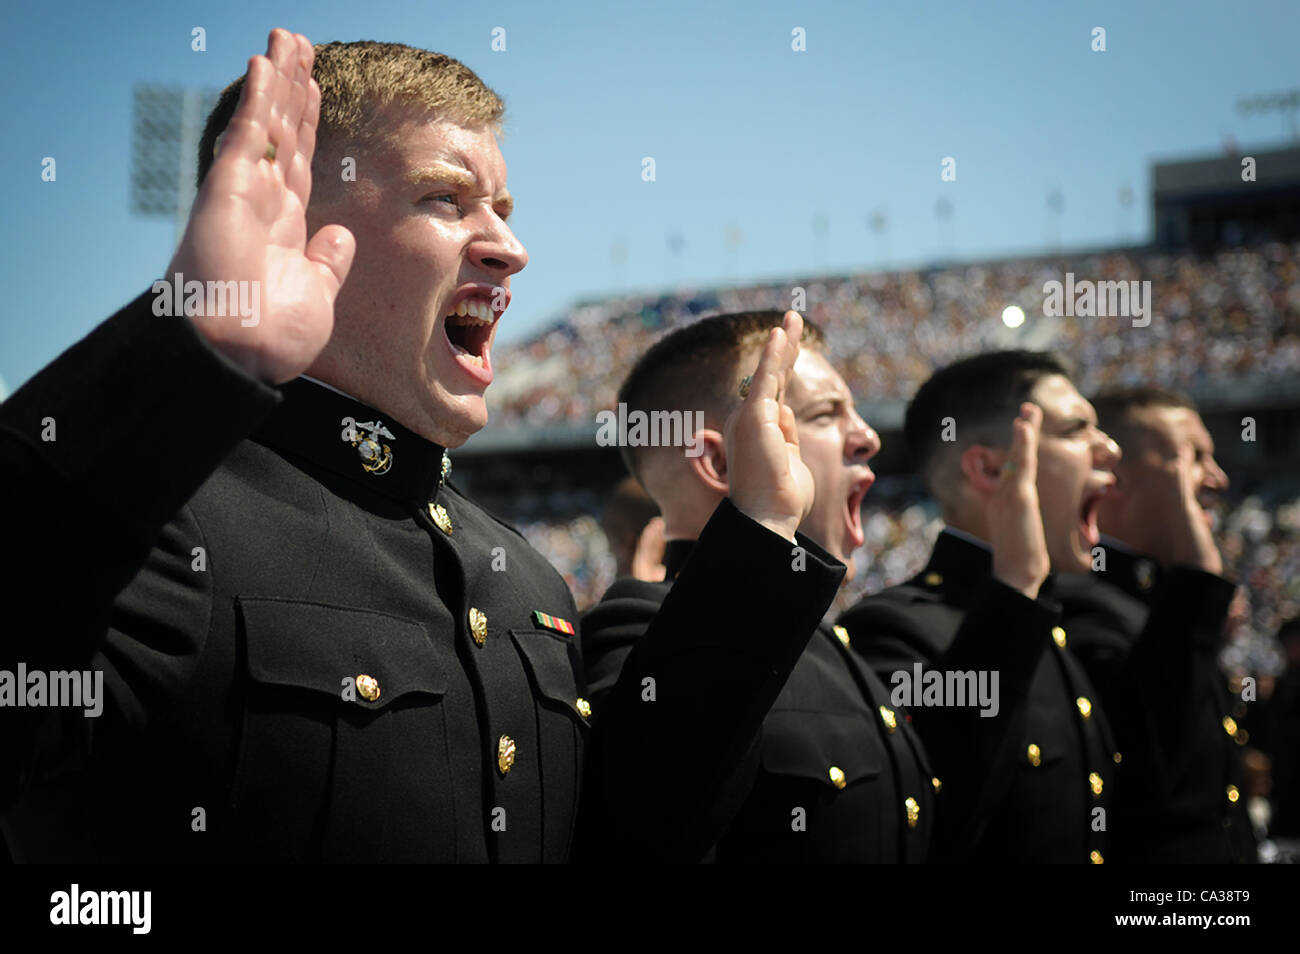 Midshipmen take the oath of service during the 2012 US Naval Academy graduation and commissioning ceremony May 29, 2012 in Annapolis, MD. Stock Photo